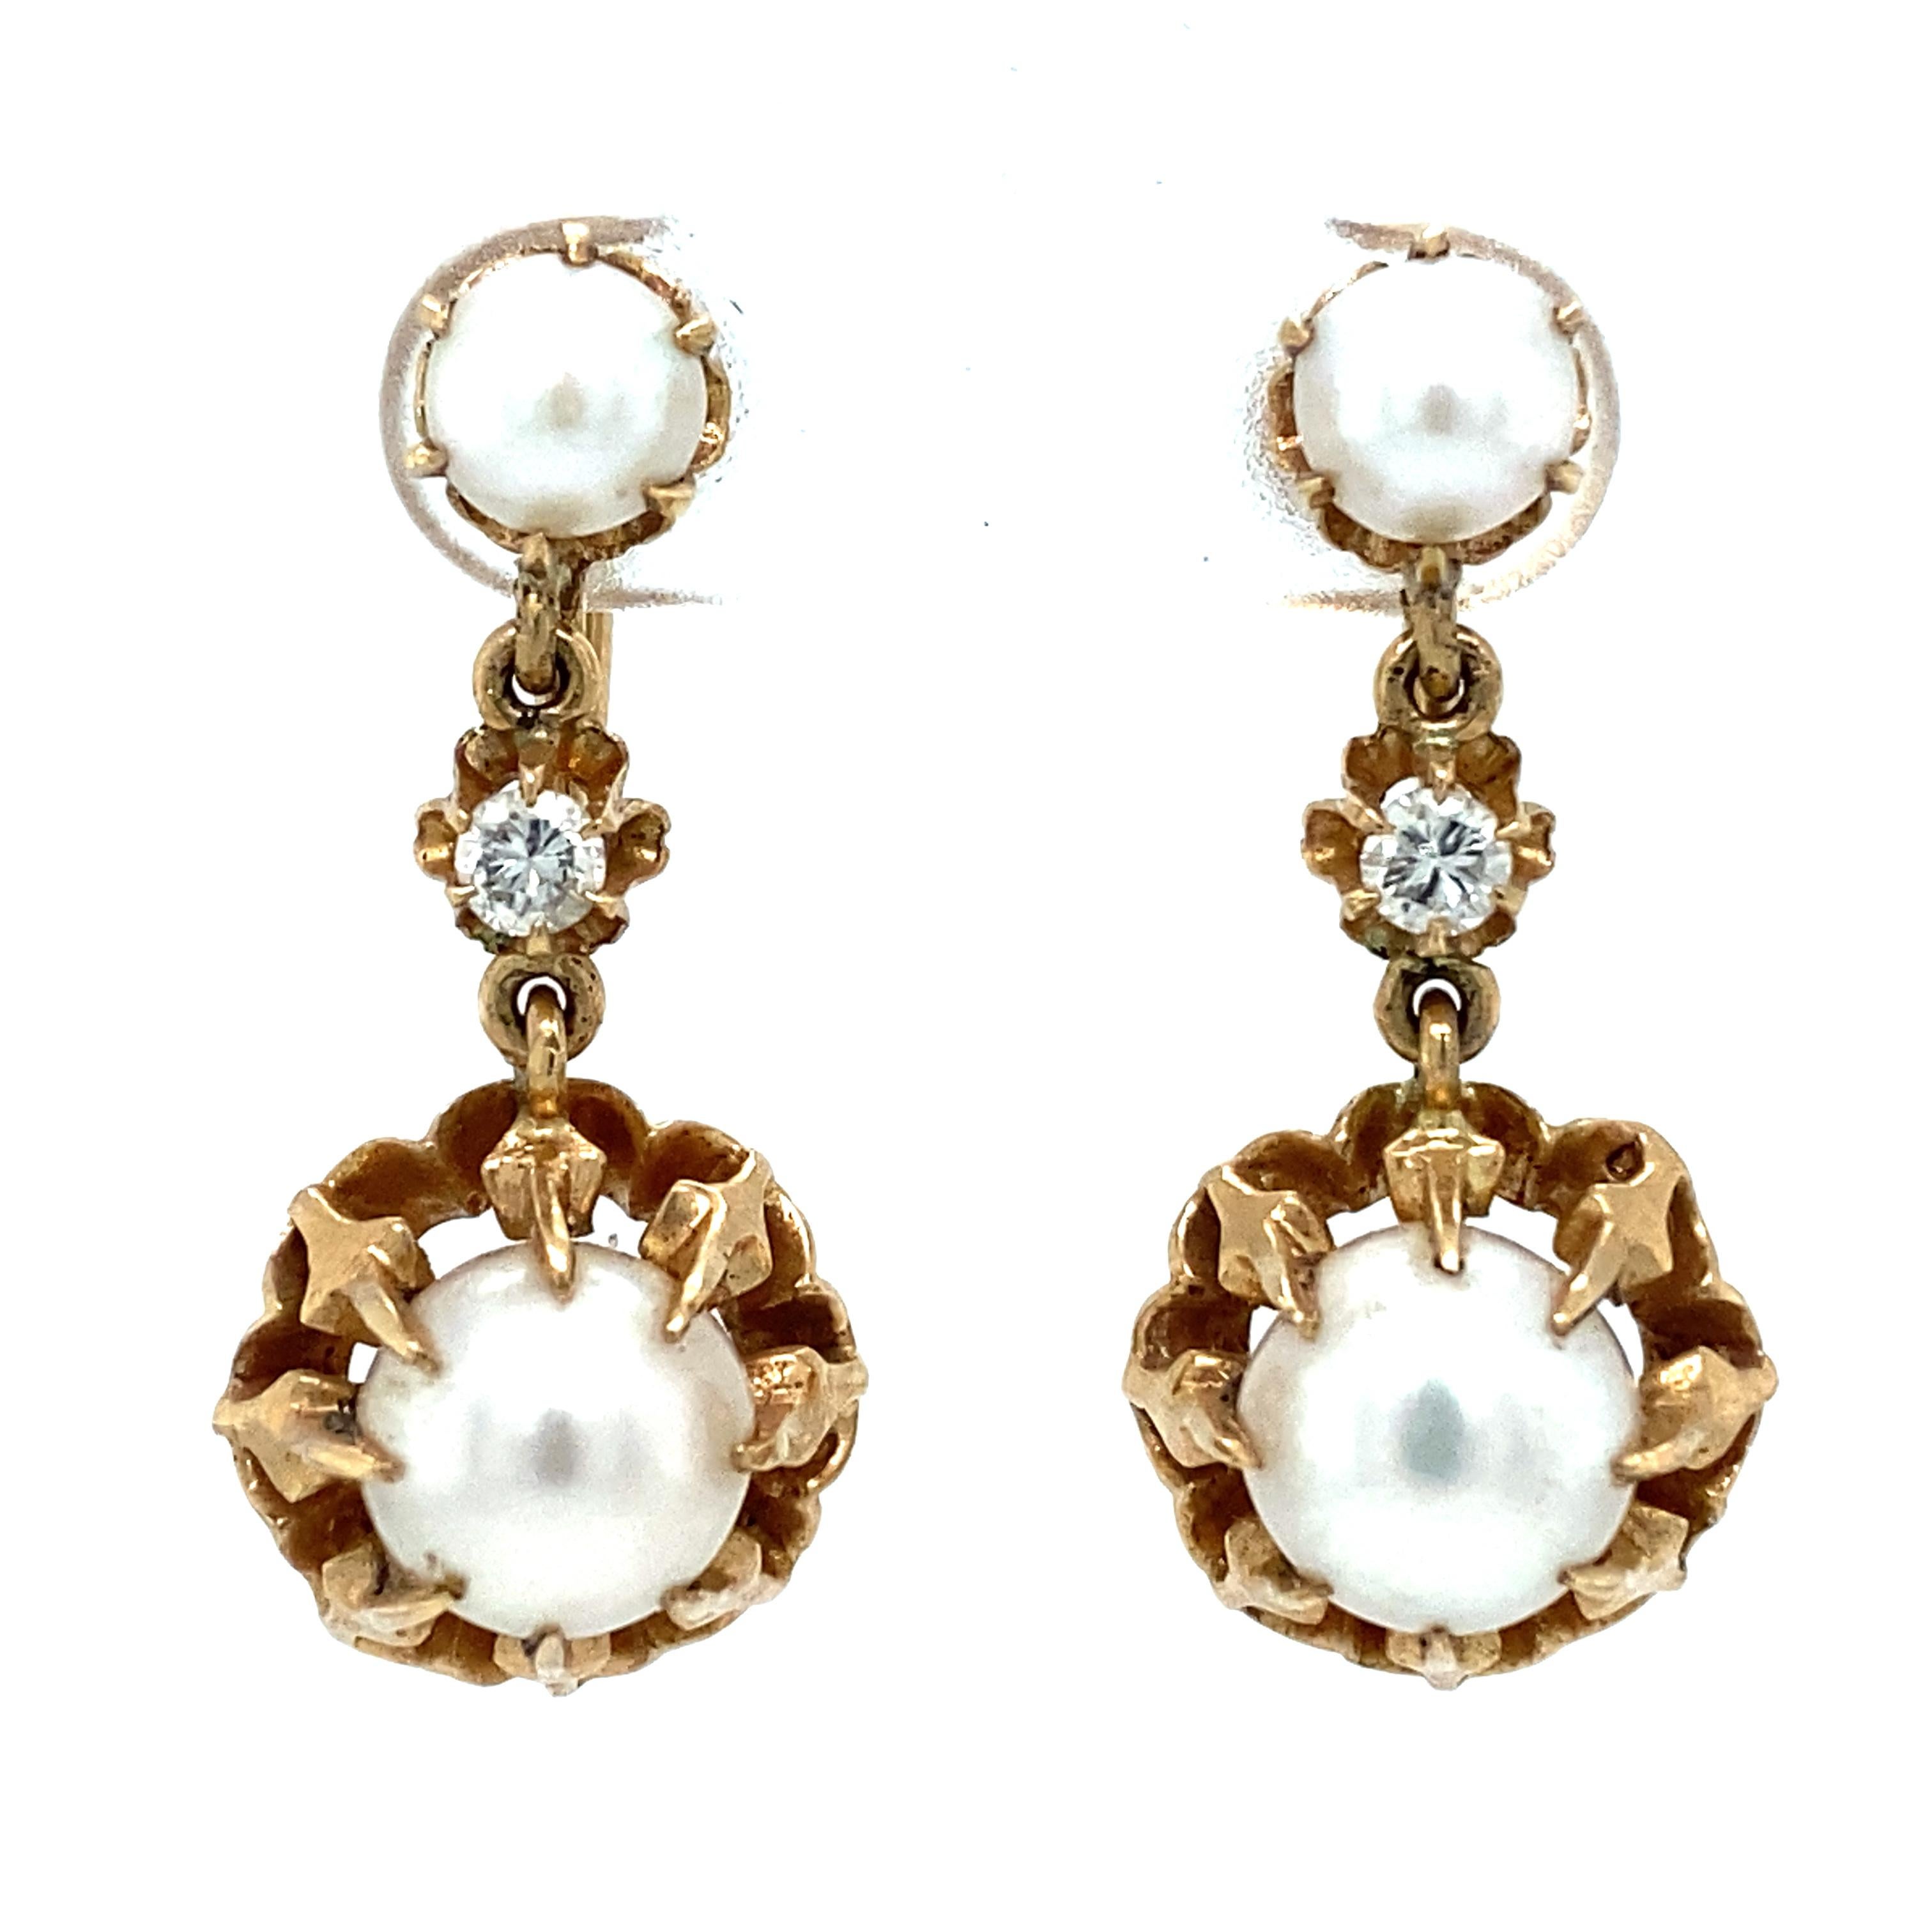 Item Details: These vintage dangle earrings have large white pearls and accent diamonds. They are non-pierced with a screw-back design.

Circa: 1950s
Metal Type: 14 Karat Yellow Gold
Weight: 8.2 grams
Size: 1 inch Length 